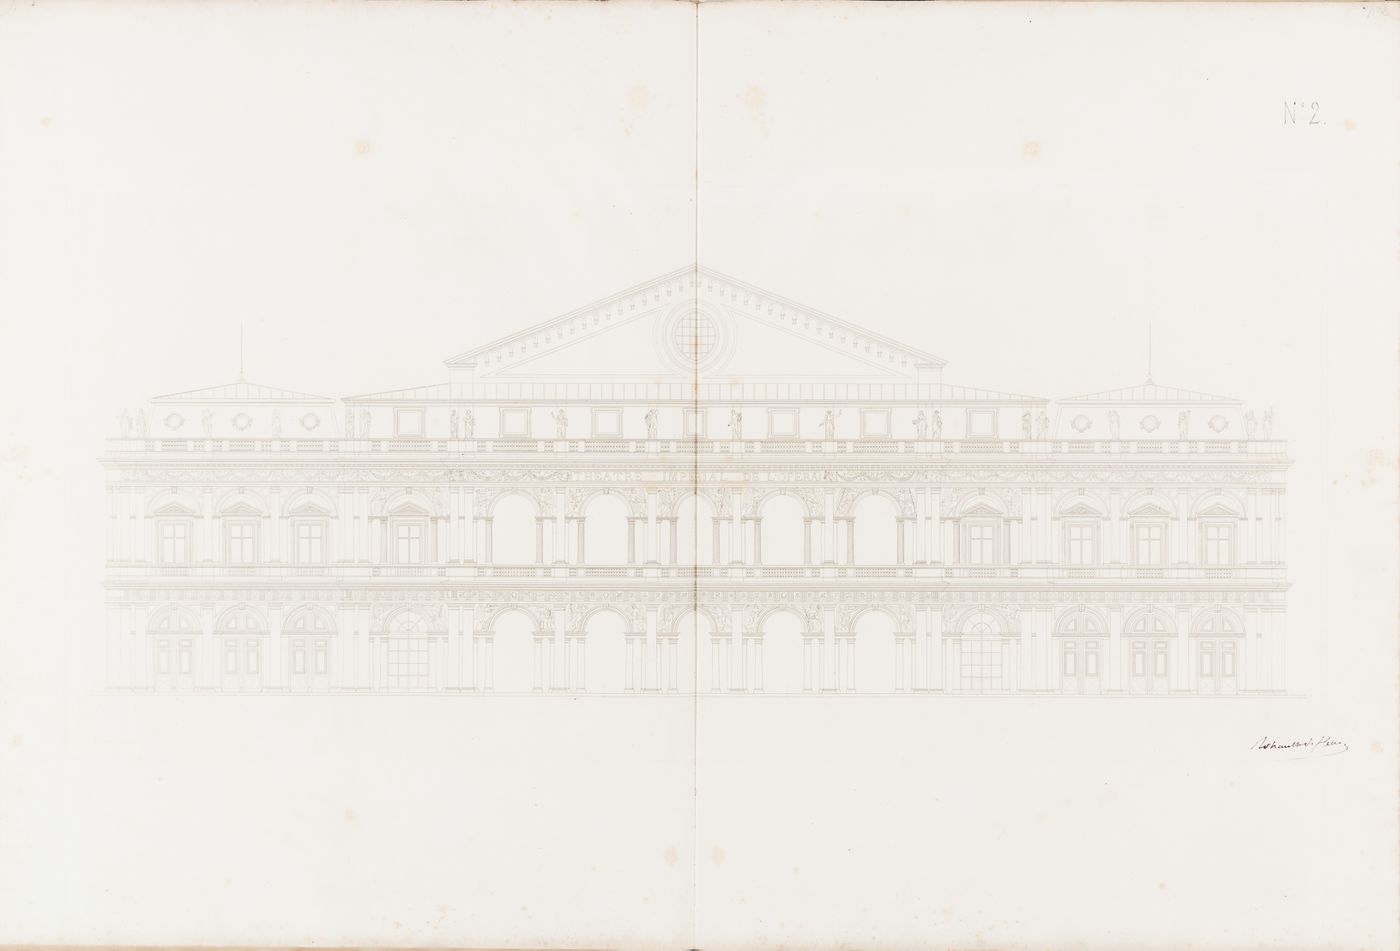 Project for an opera house for the Théâtre impérial de l'opéra: Elevation for the principal façade